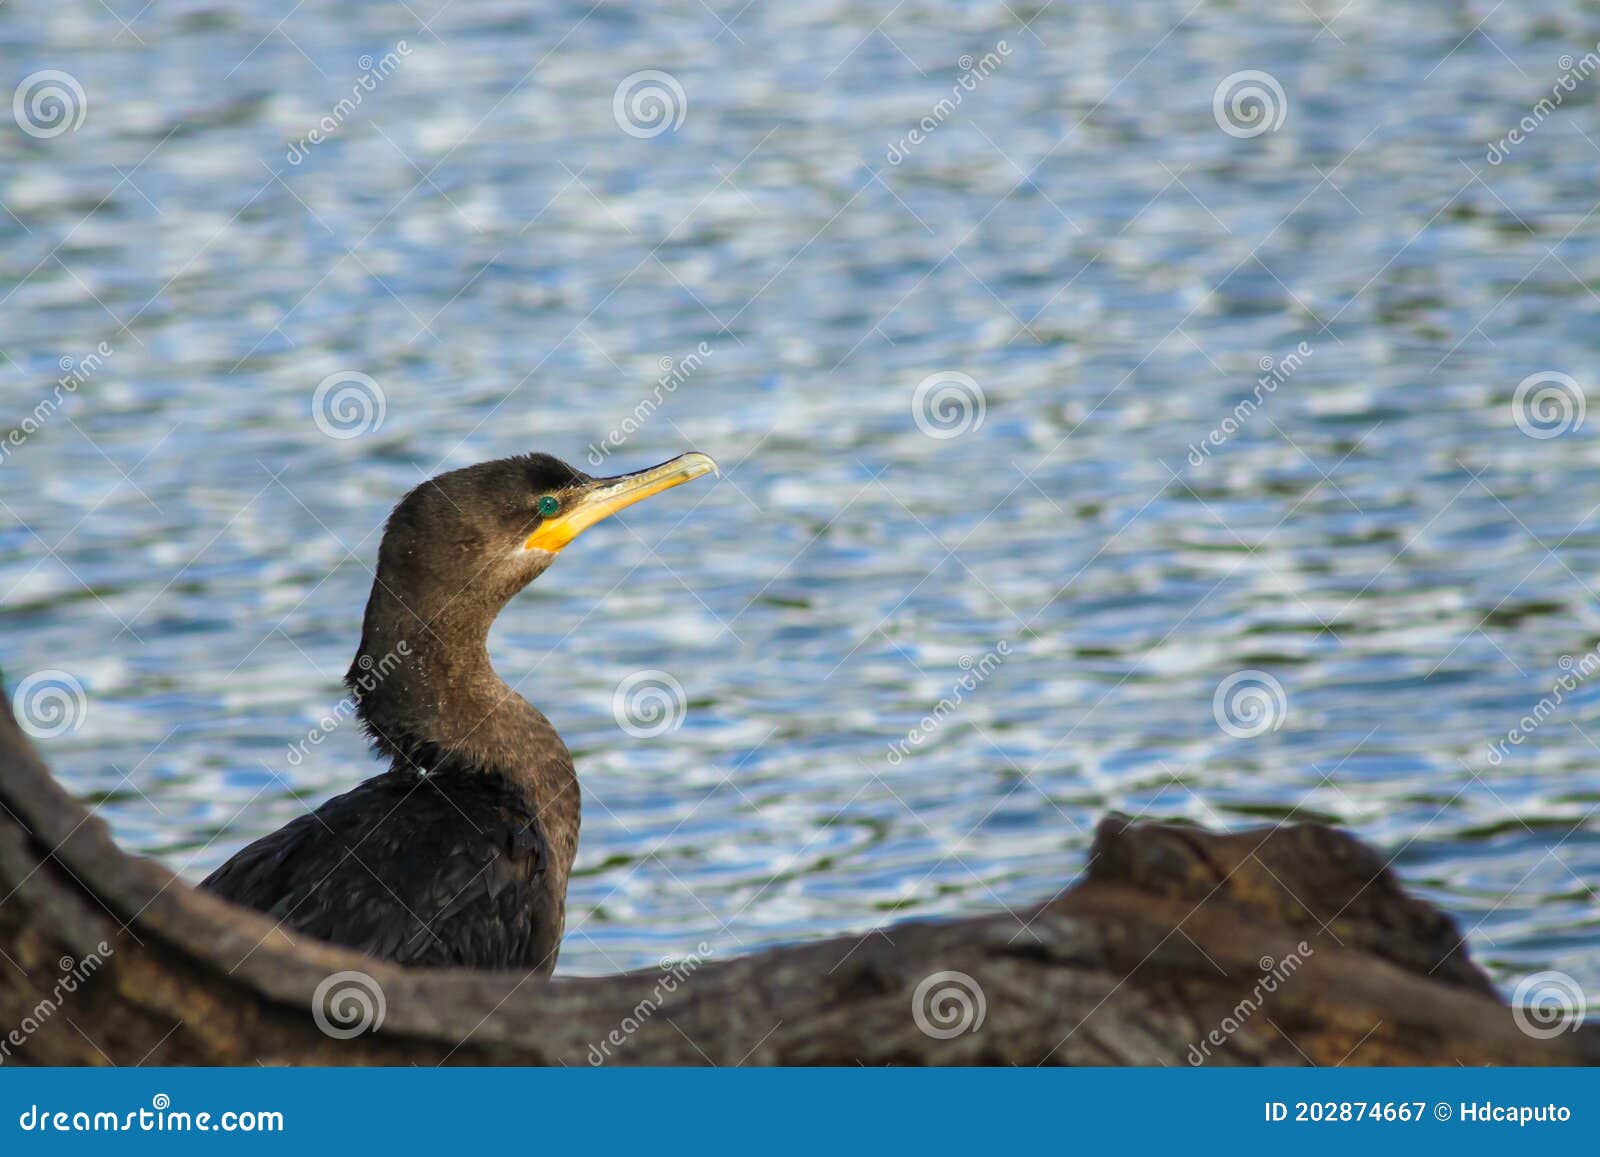 bigua, neotropical cormorant or phalacocorax brasilianus perched on a branch before returning to the water to fish